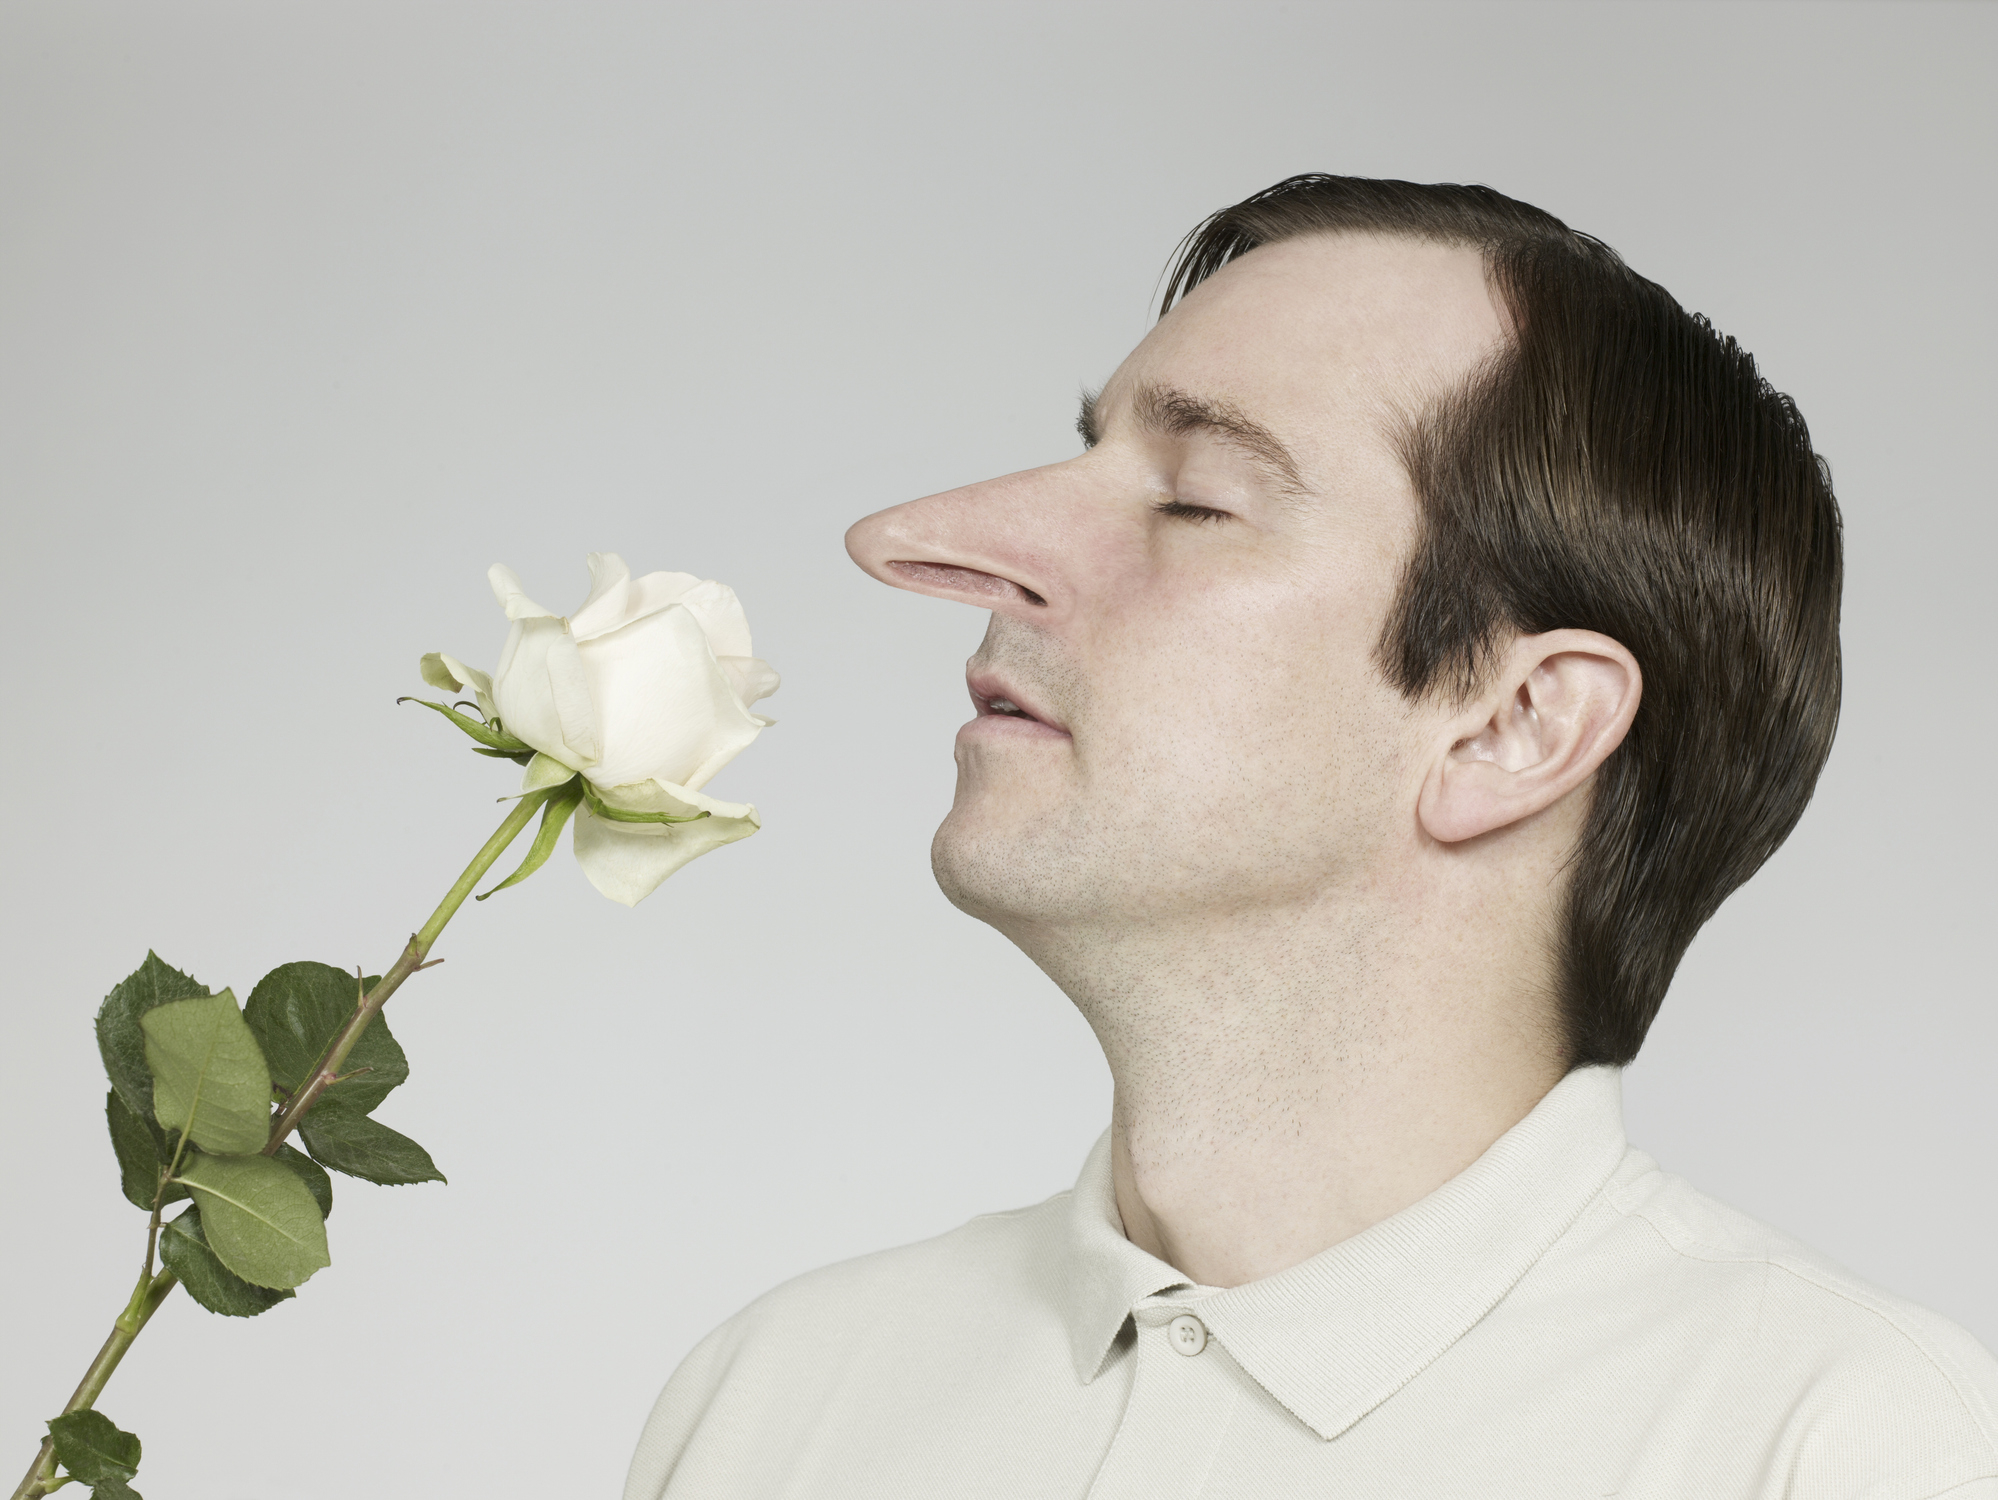 Man with exaggerated long nose smelling a white rose